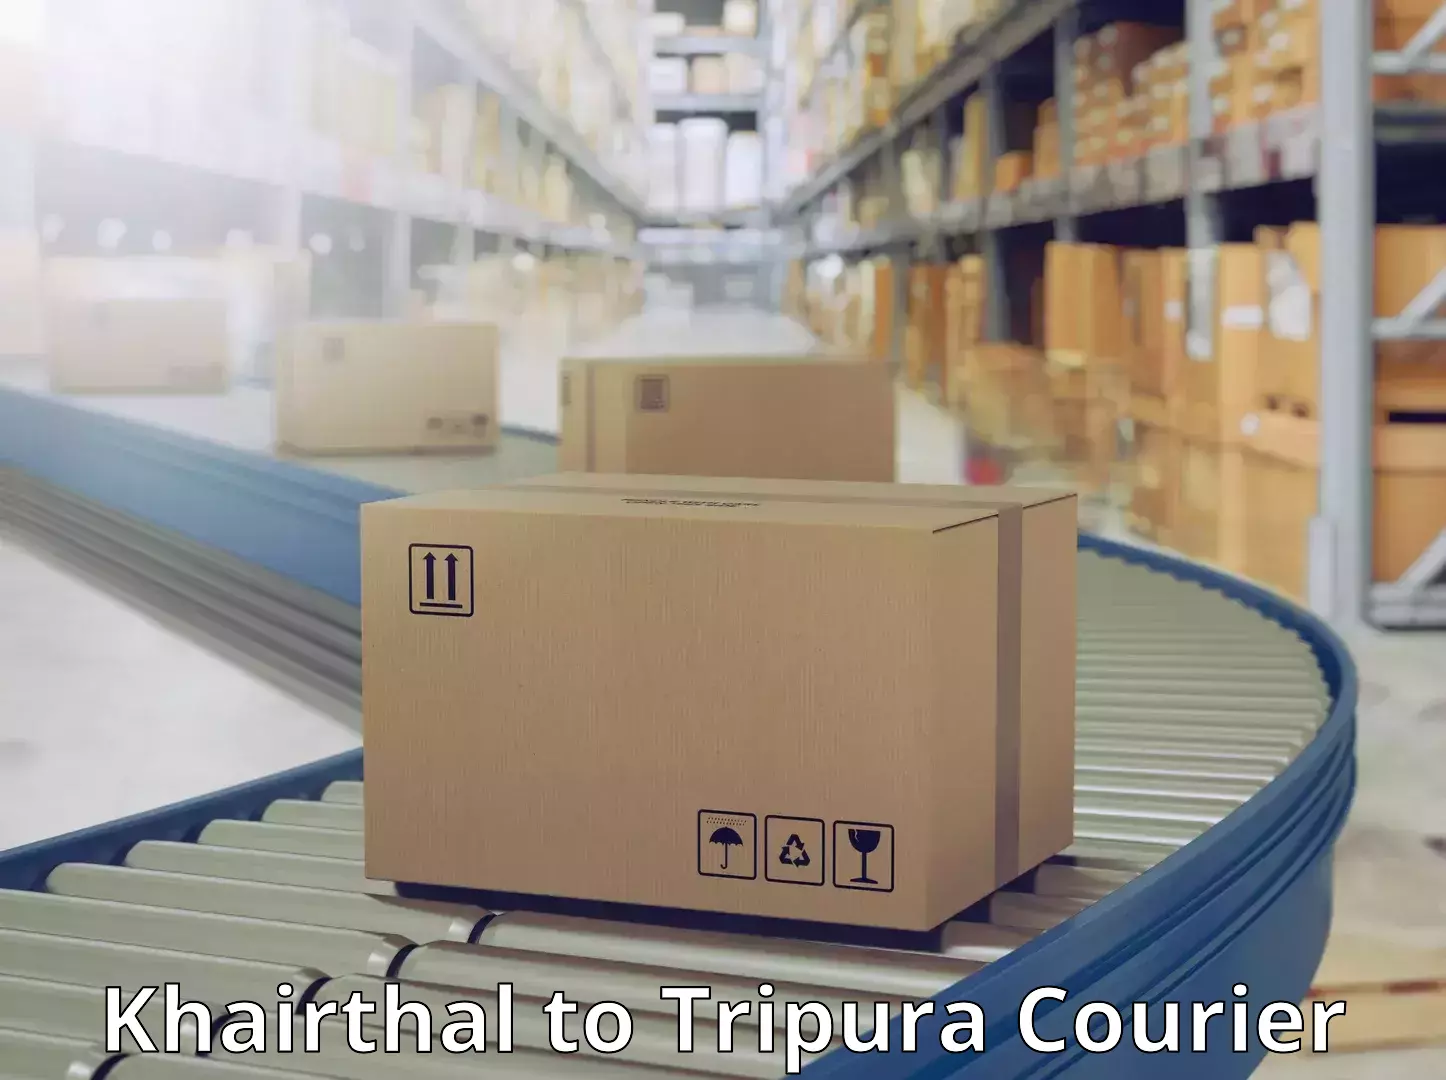 Express courier capabilities Khairthal to Udaipur Tripura